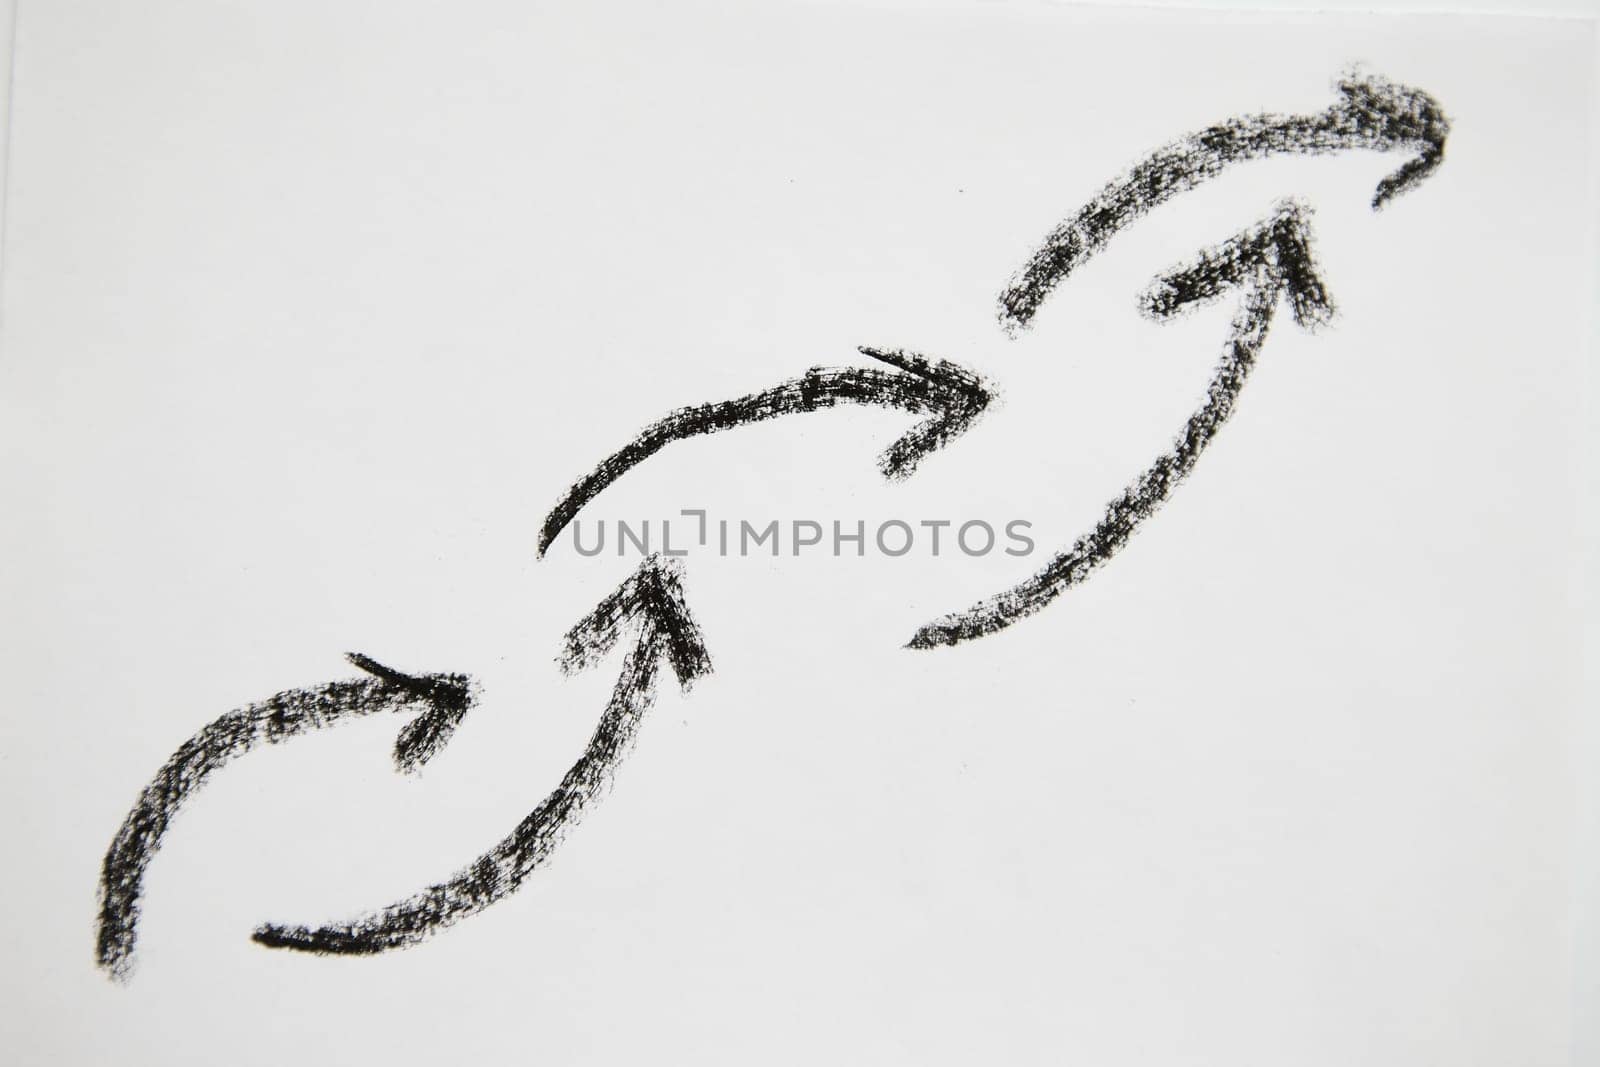 Many graceful smooth Hand drawn black chalk arrows like a chain. Concept of business, choosing direction, moving forward. Abstract sign, background, texture. Blurred